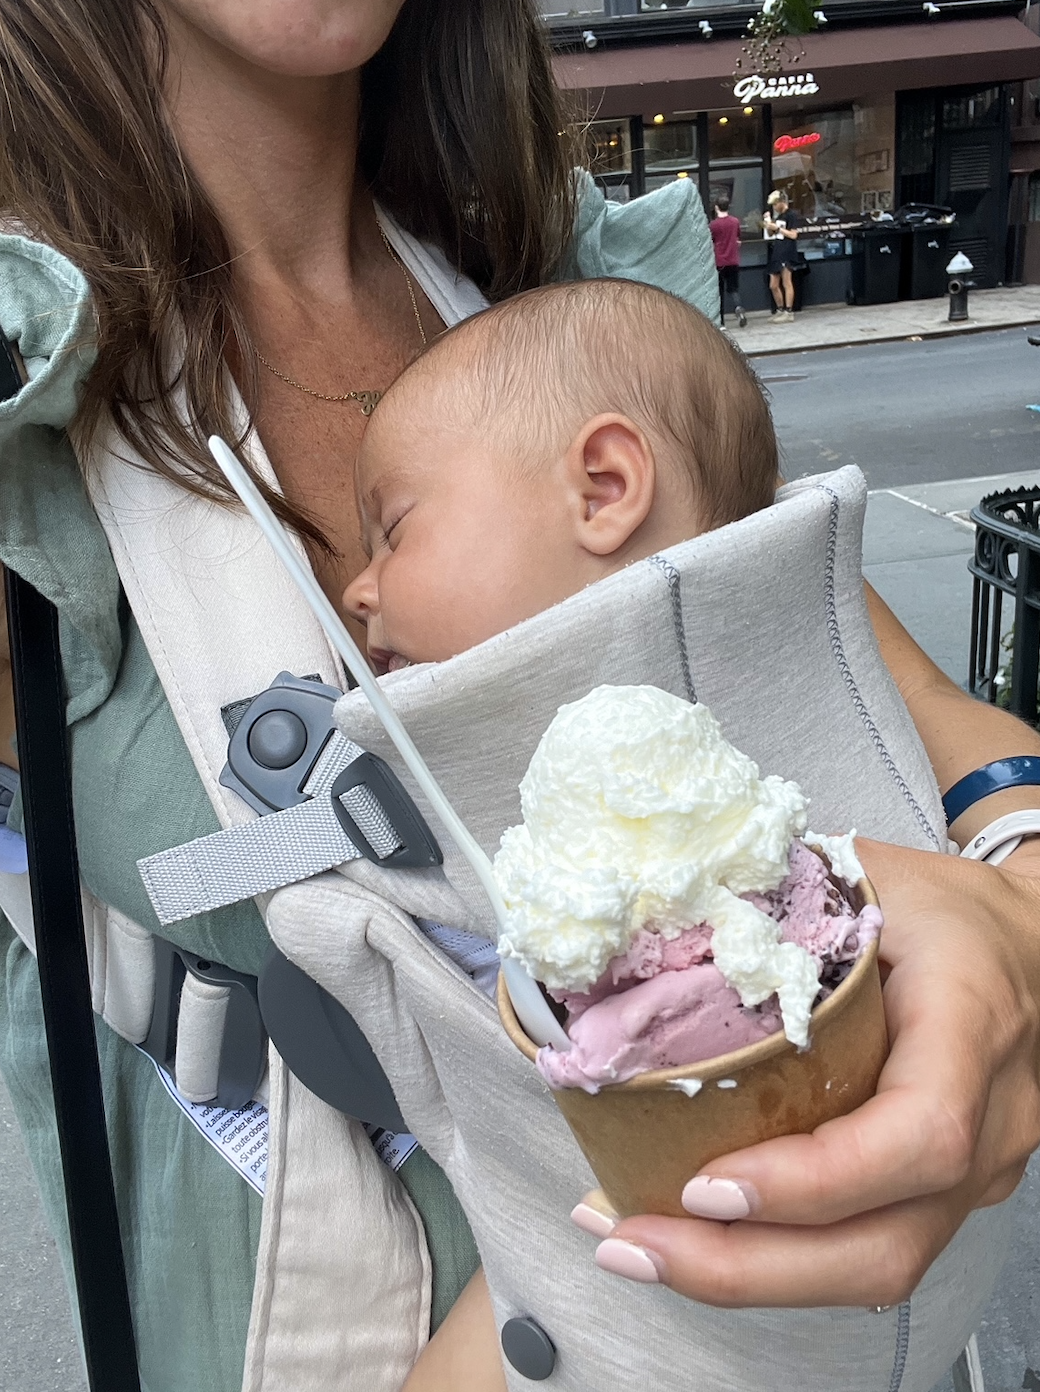 Woman holding a sleeping baby in a carrier, with an ice cream cone in her hand